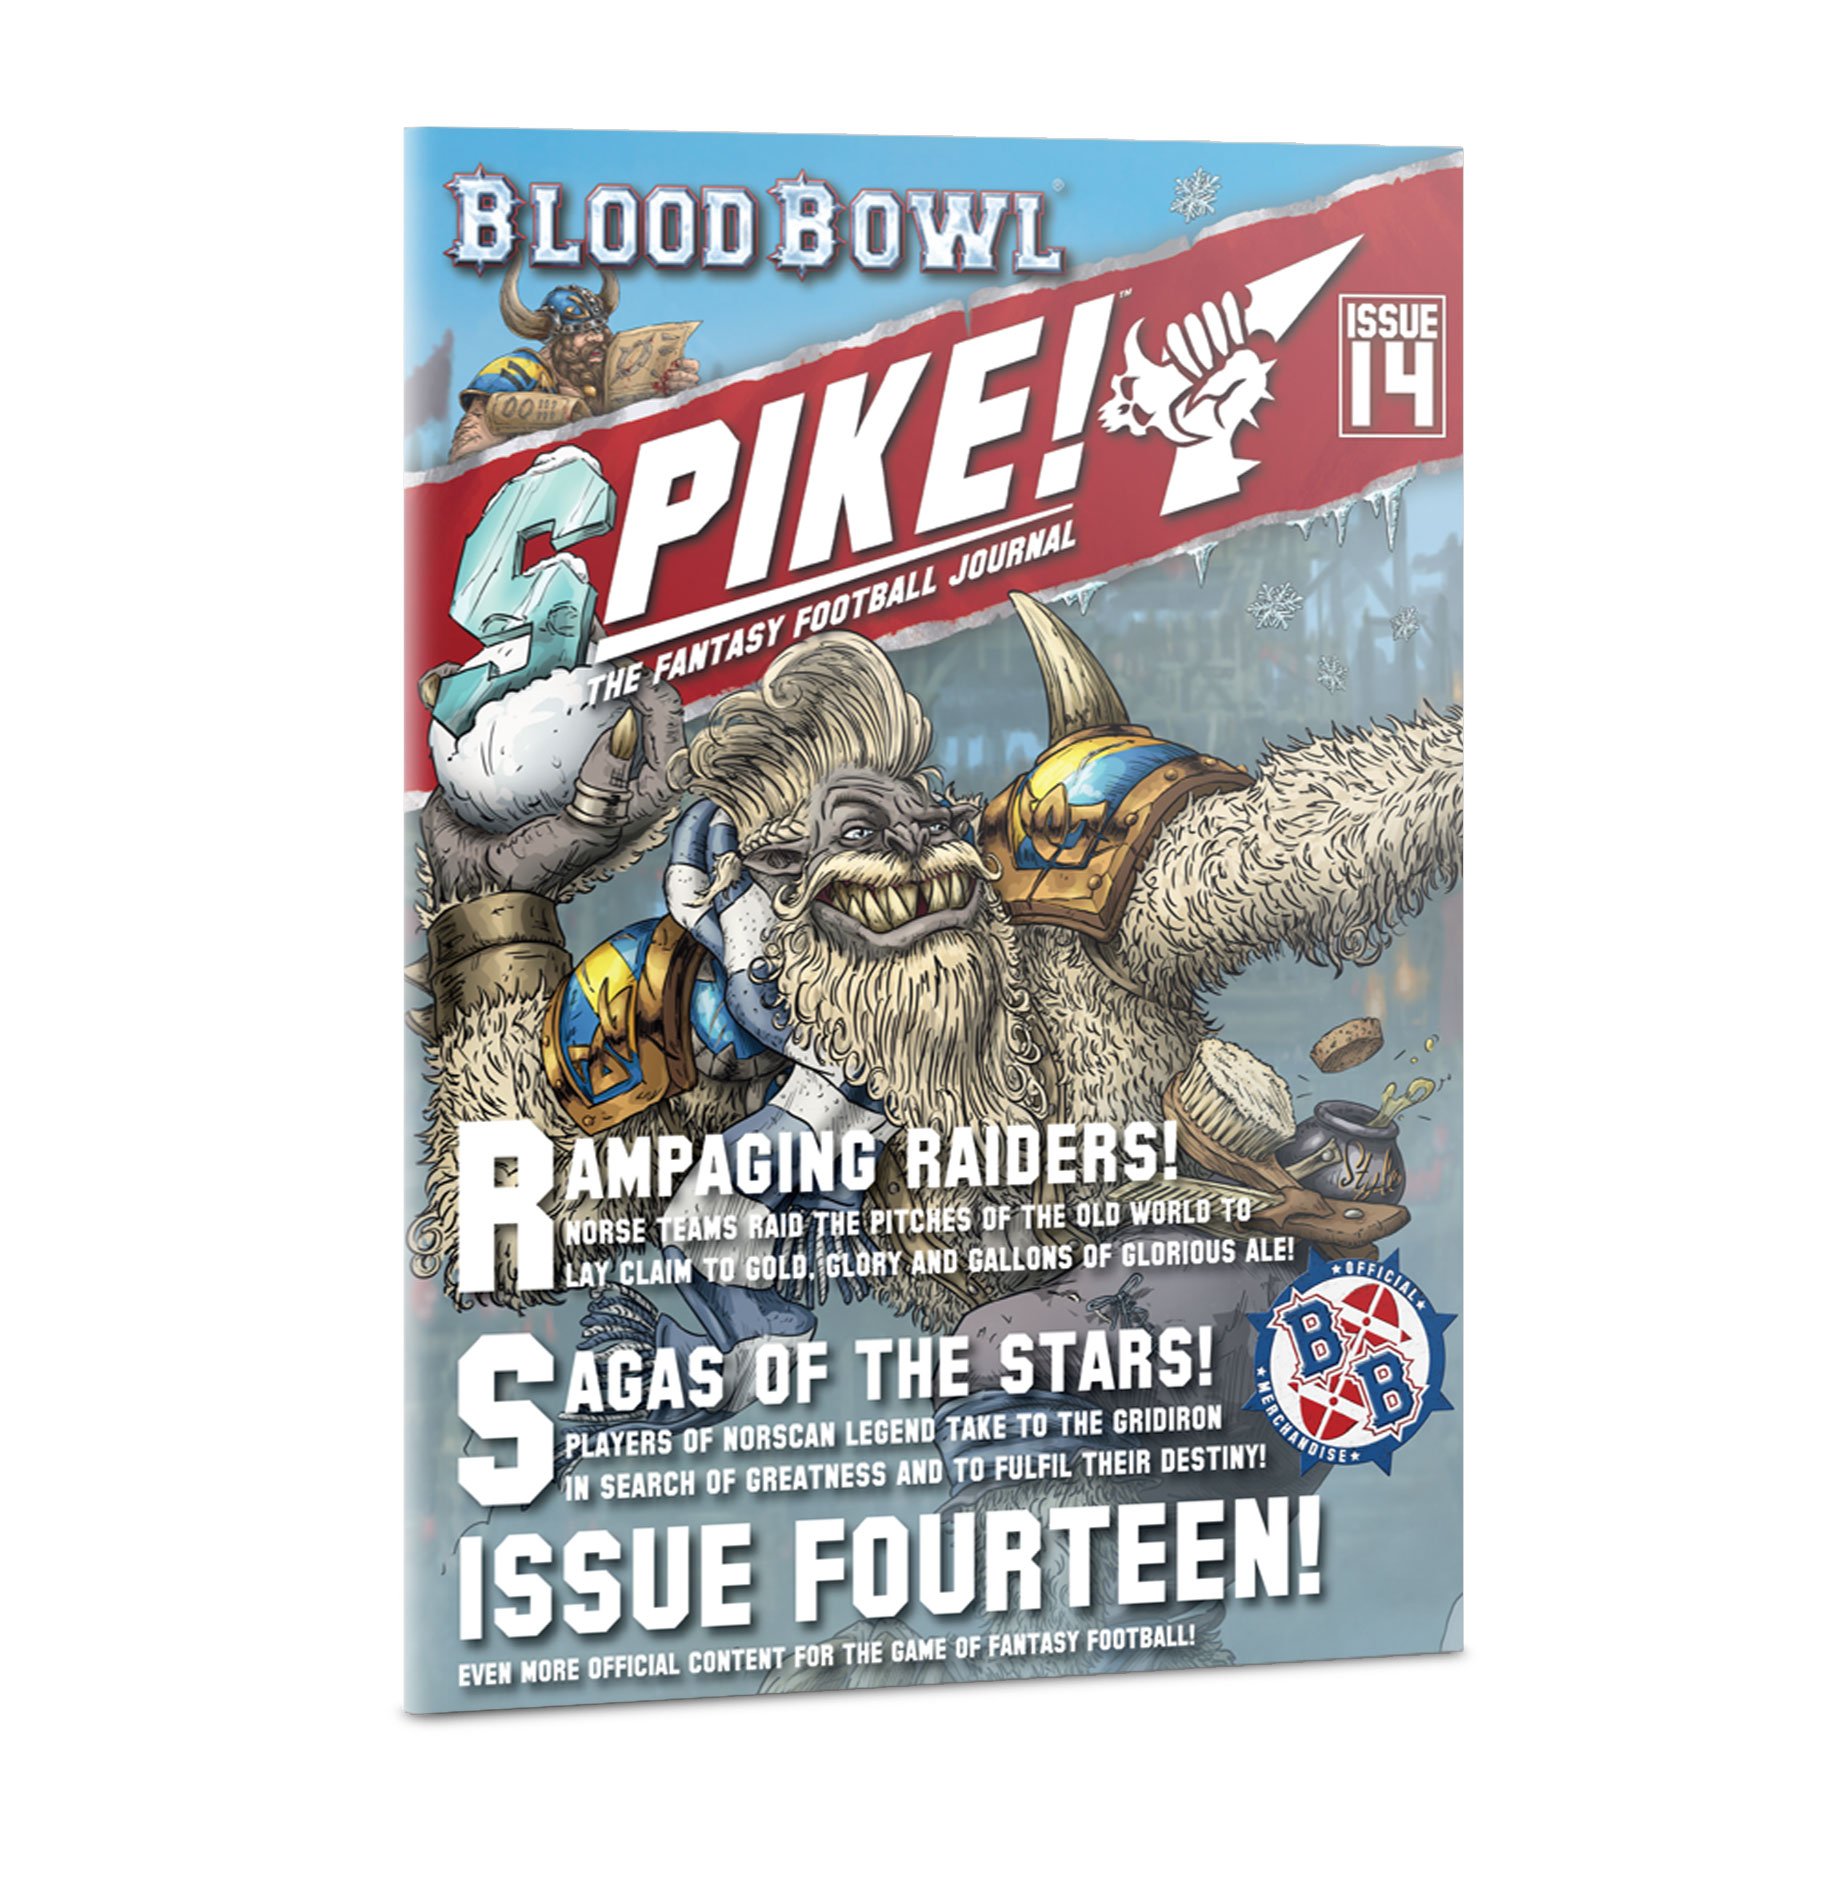 Blood Bowl: Spike! Journal Issue 14 